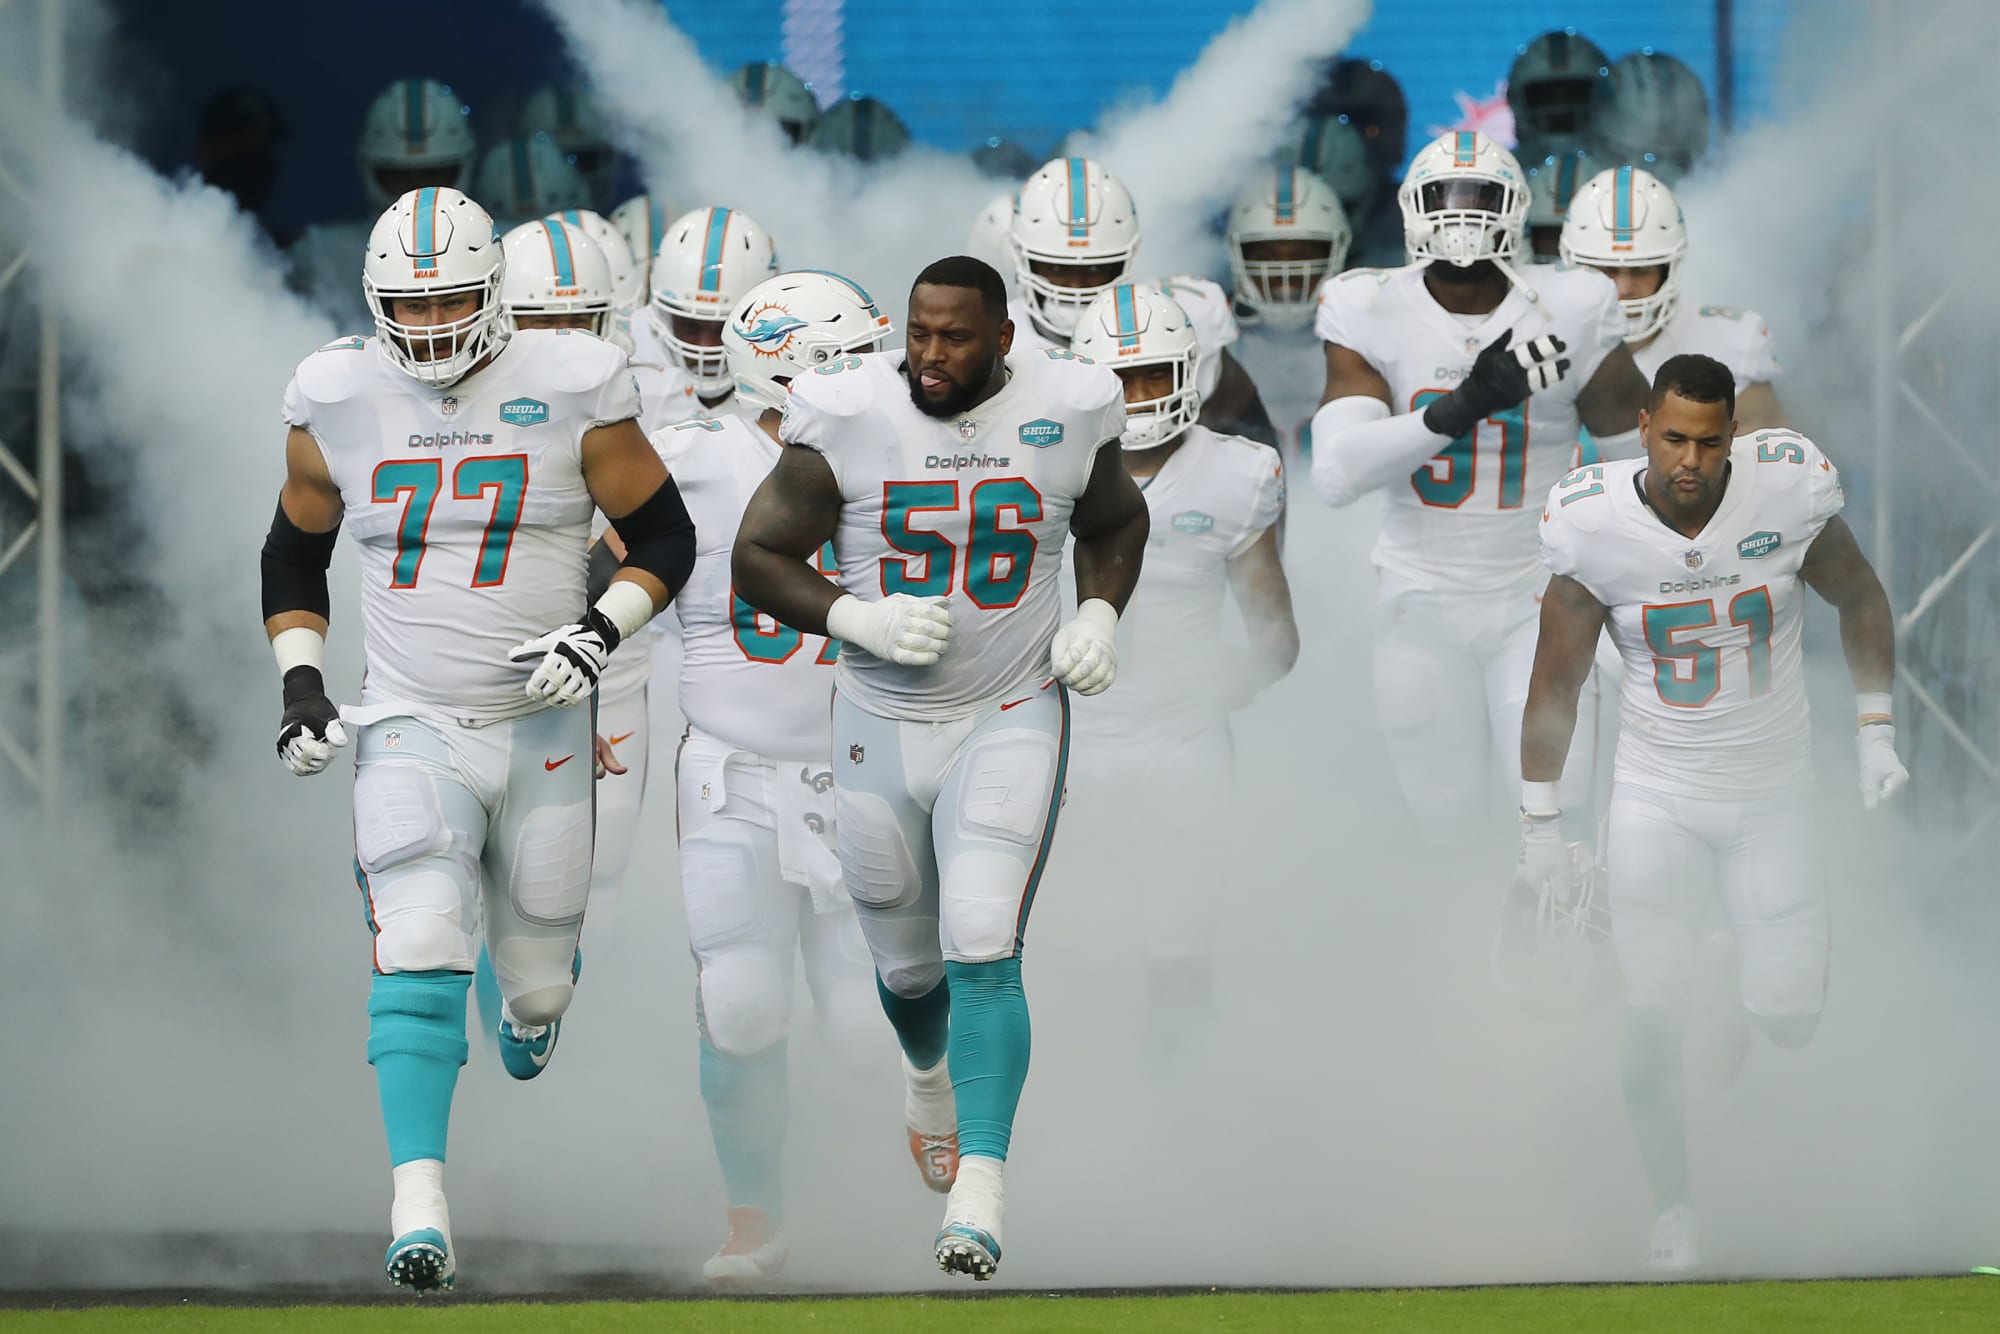 Not time to panic for the Miami Dolphins despite opening losses